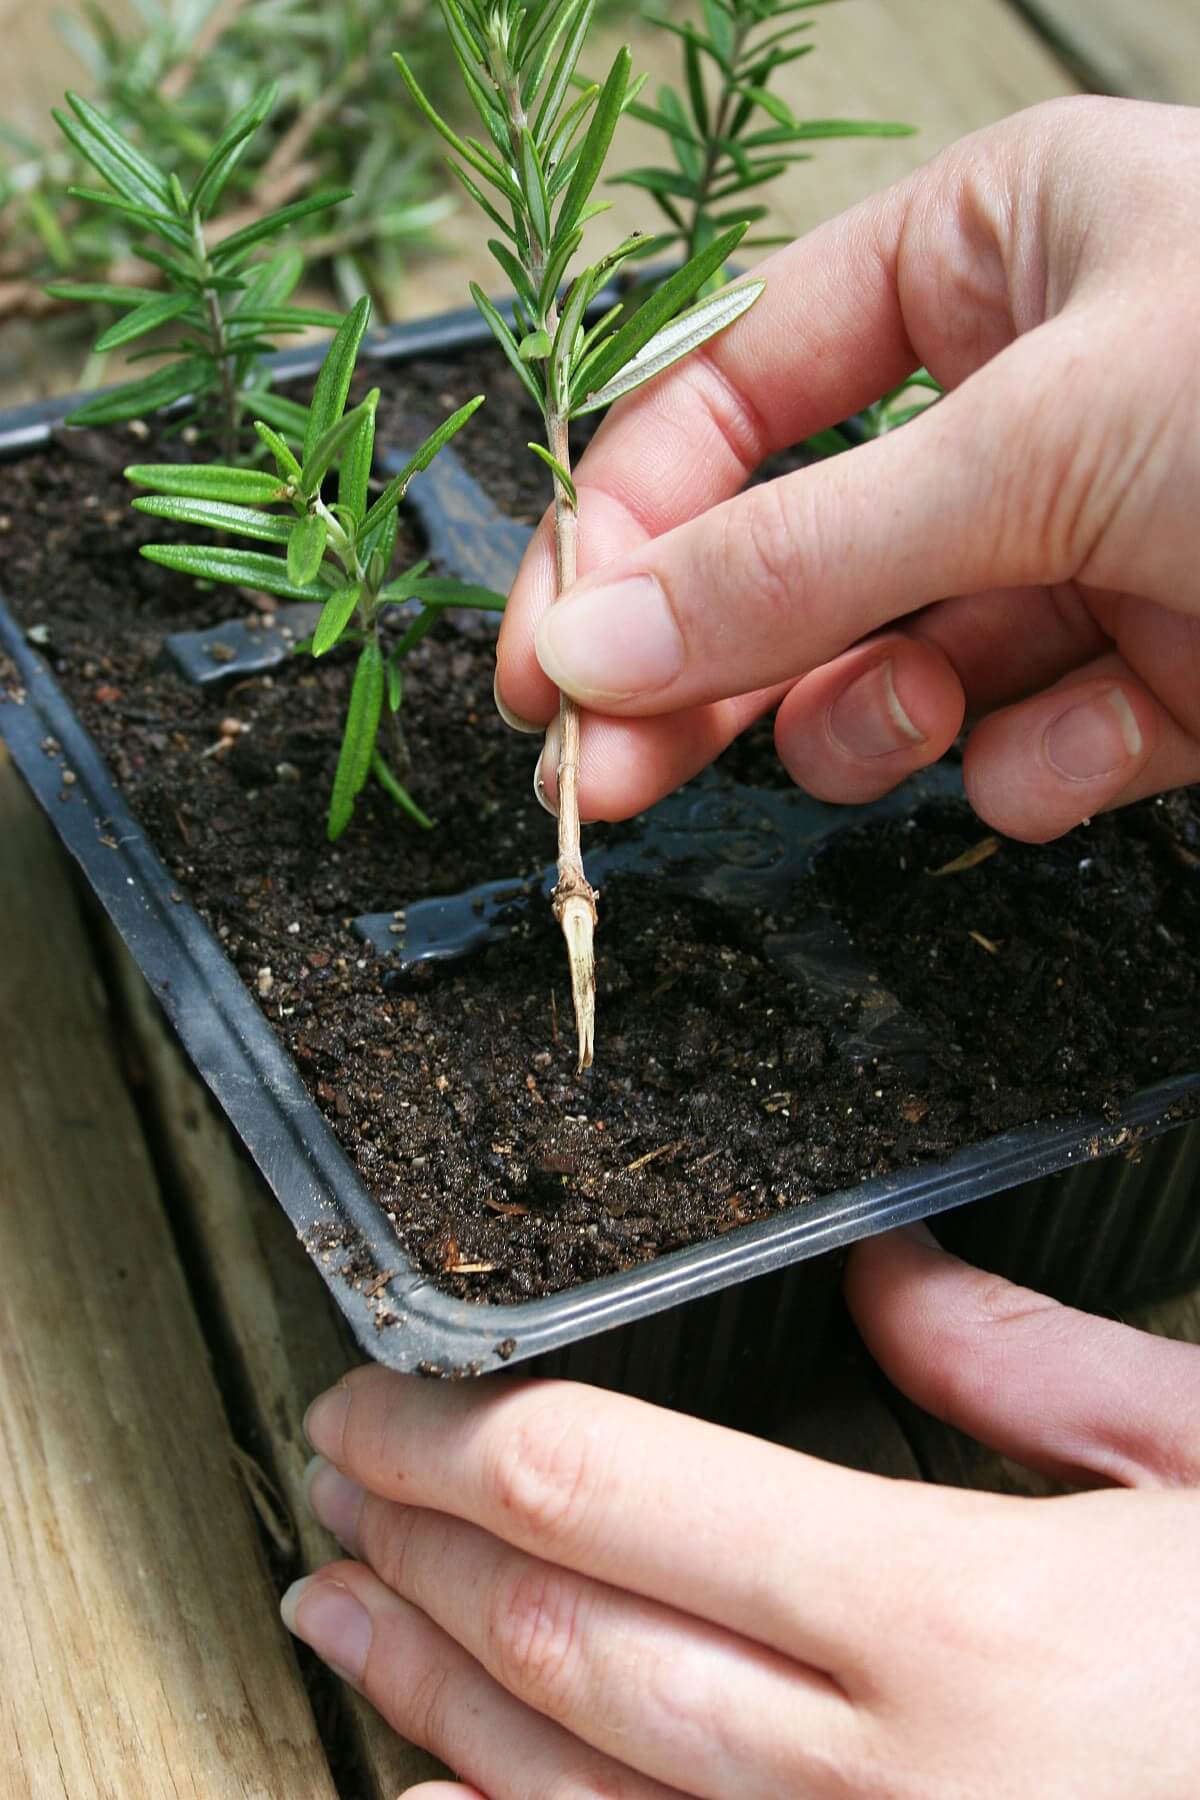 setting pointed end of cut rosemary into soil for rooting